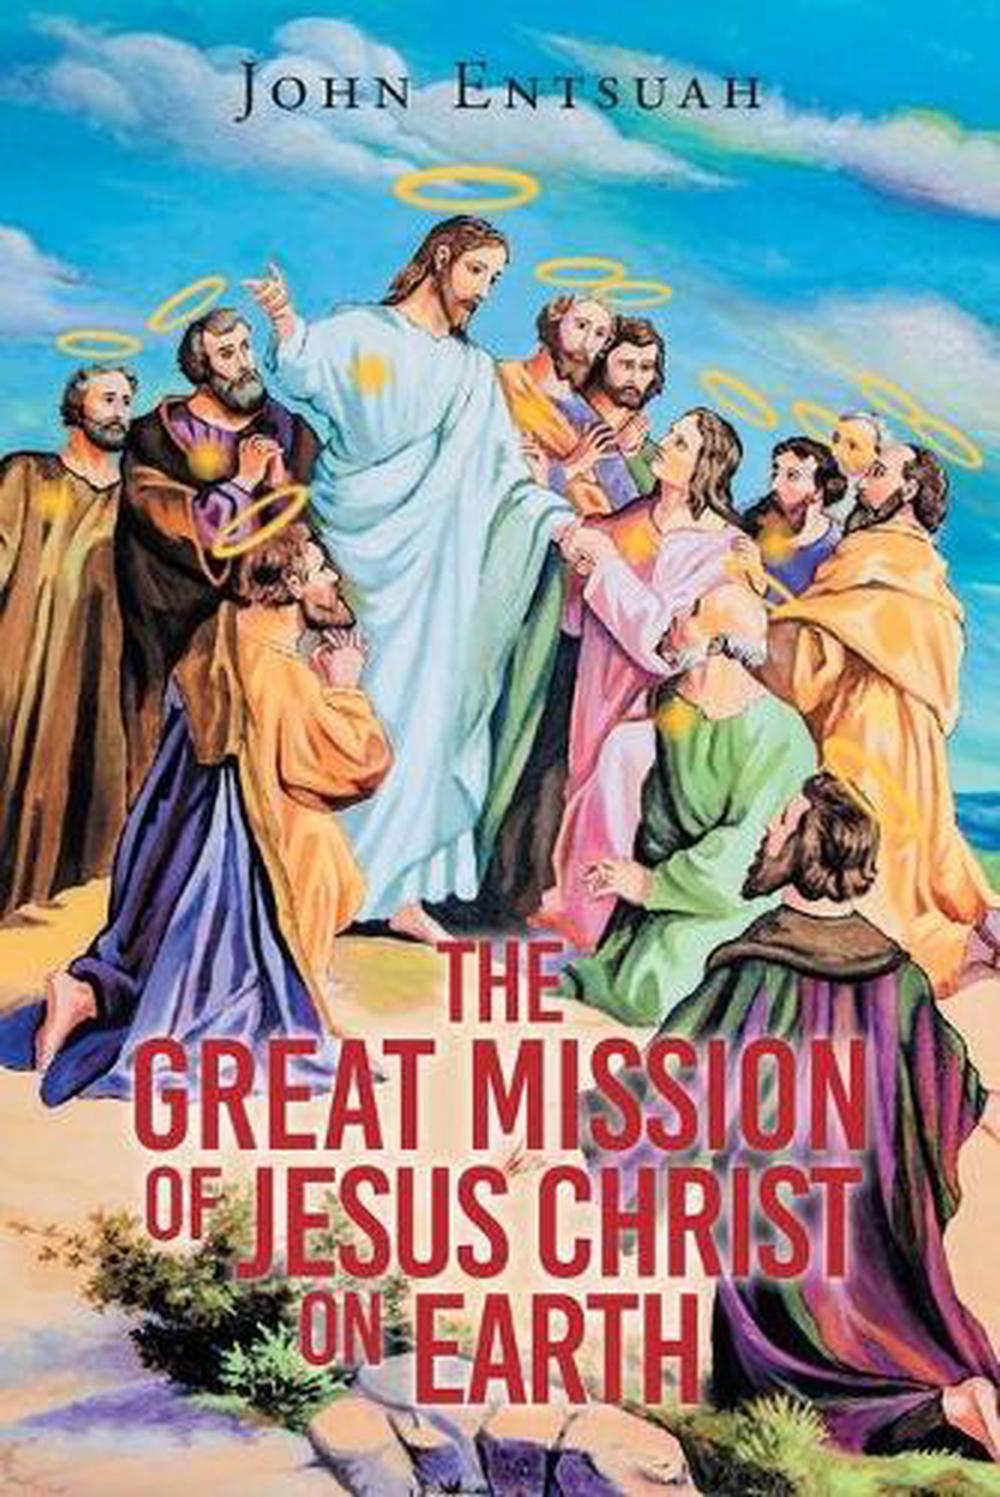 Great Mission Of Jesus Christ On Earth By John Entsuah Free Shipping